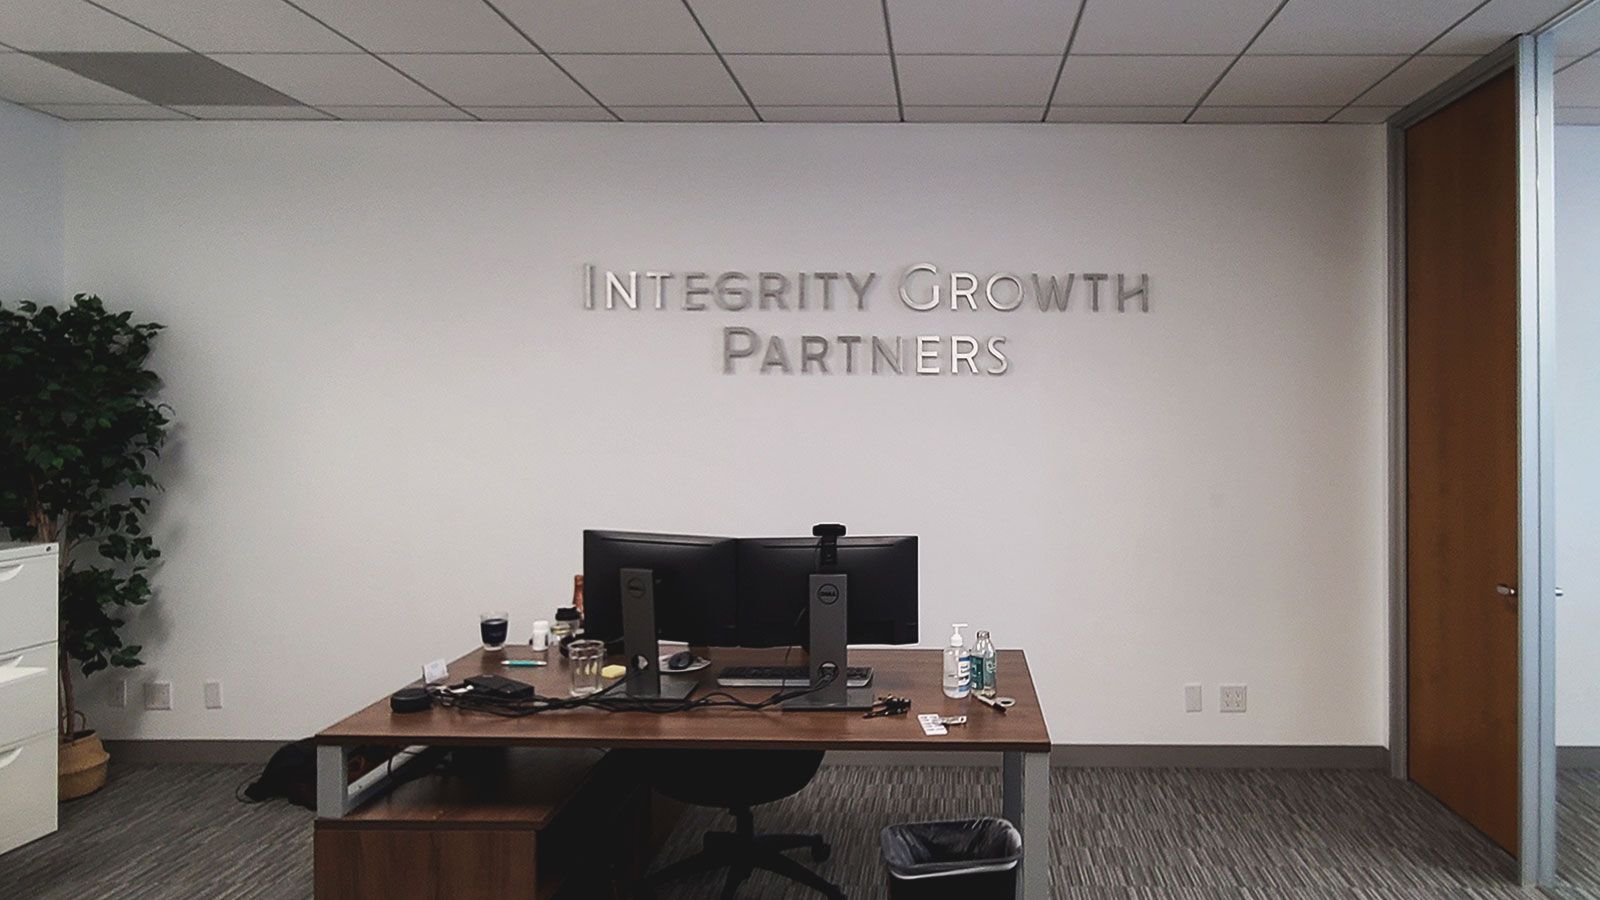 Integrity growth partners office sign